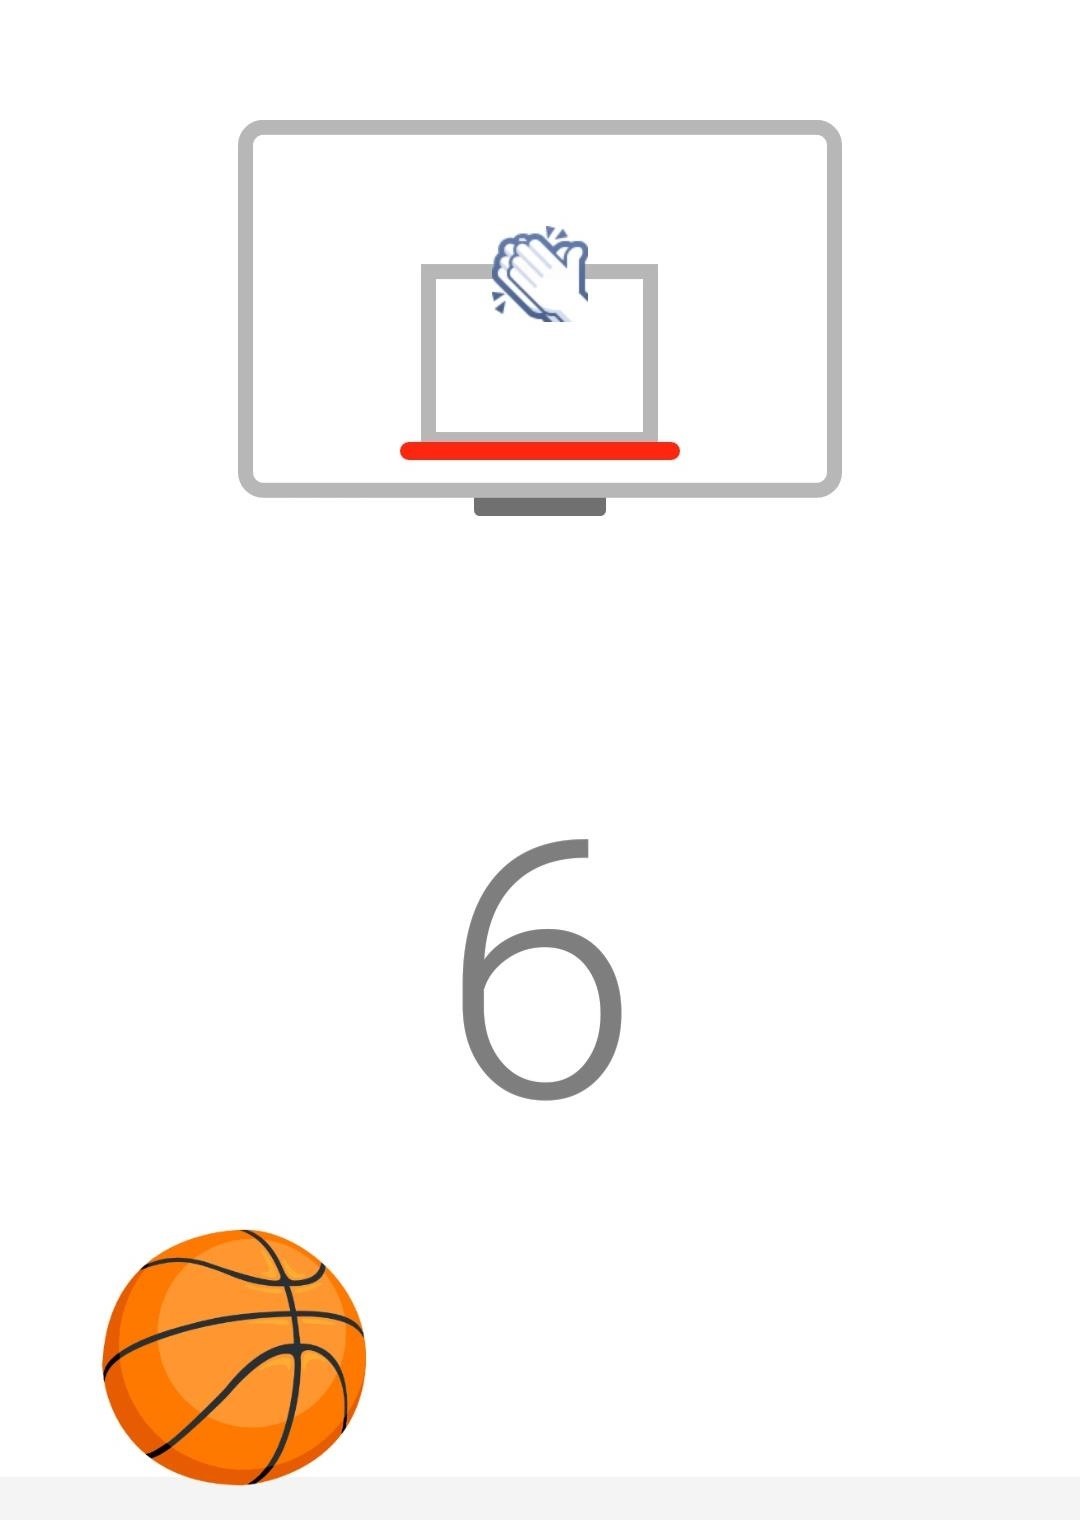 How to Play the Secret Basketball Game in Facebook Messenger